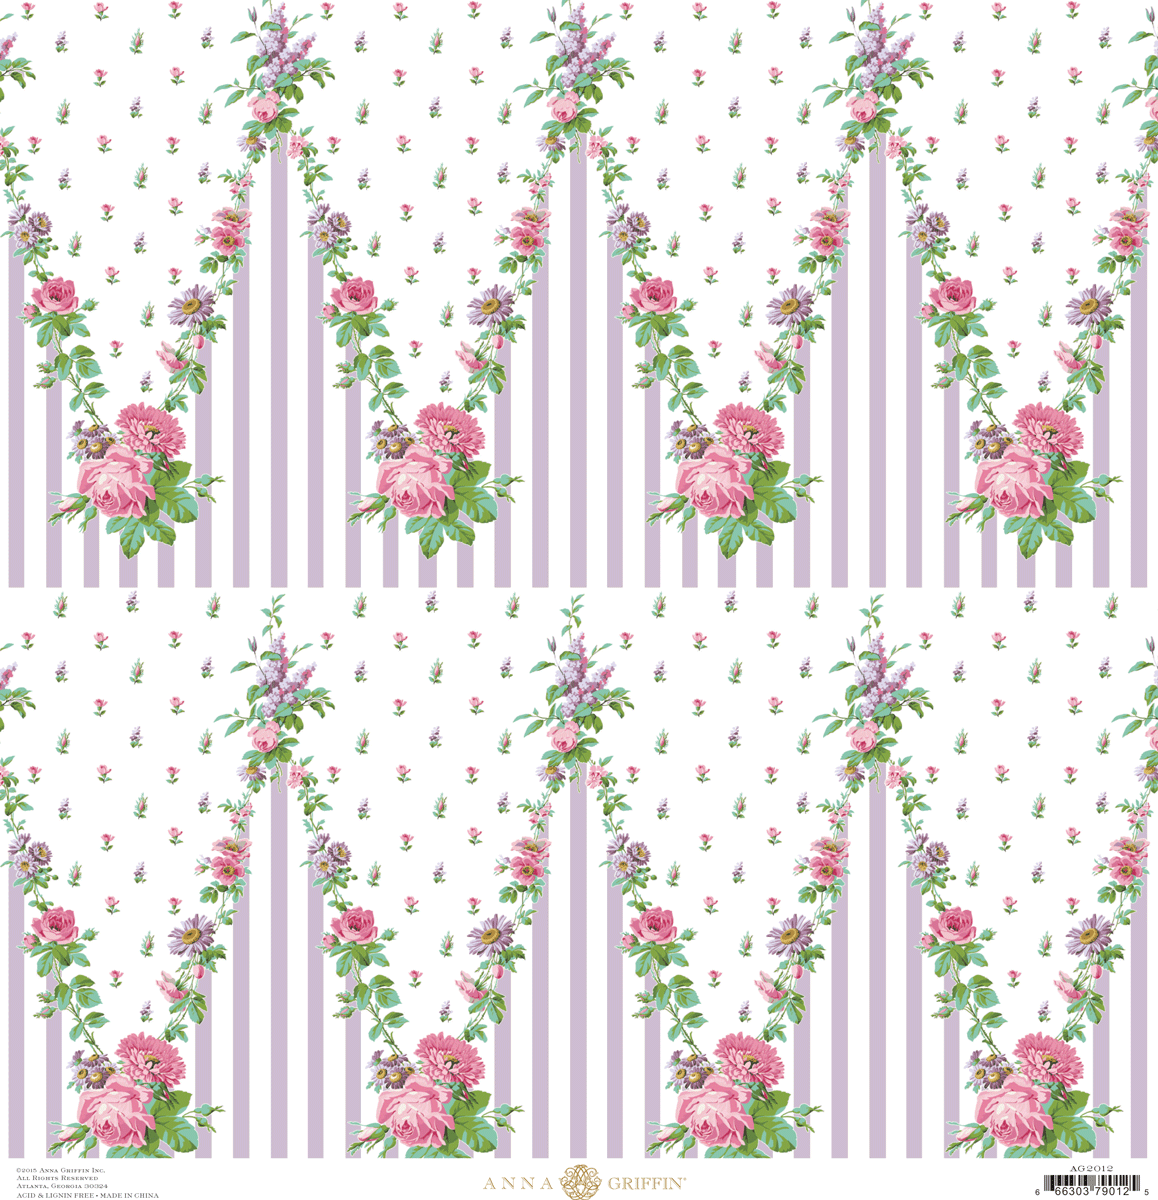 a pattern of pink flowers on a white background.